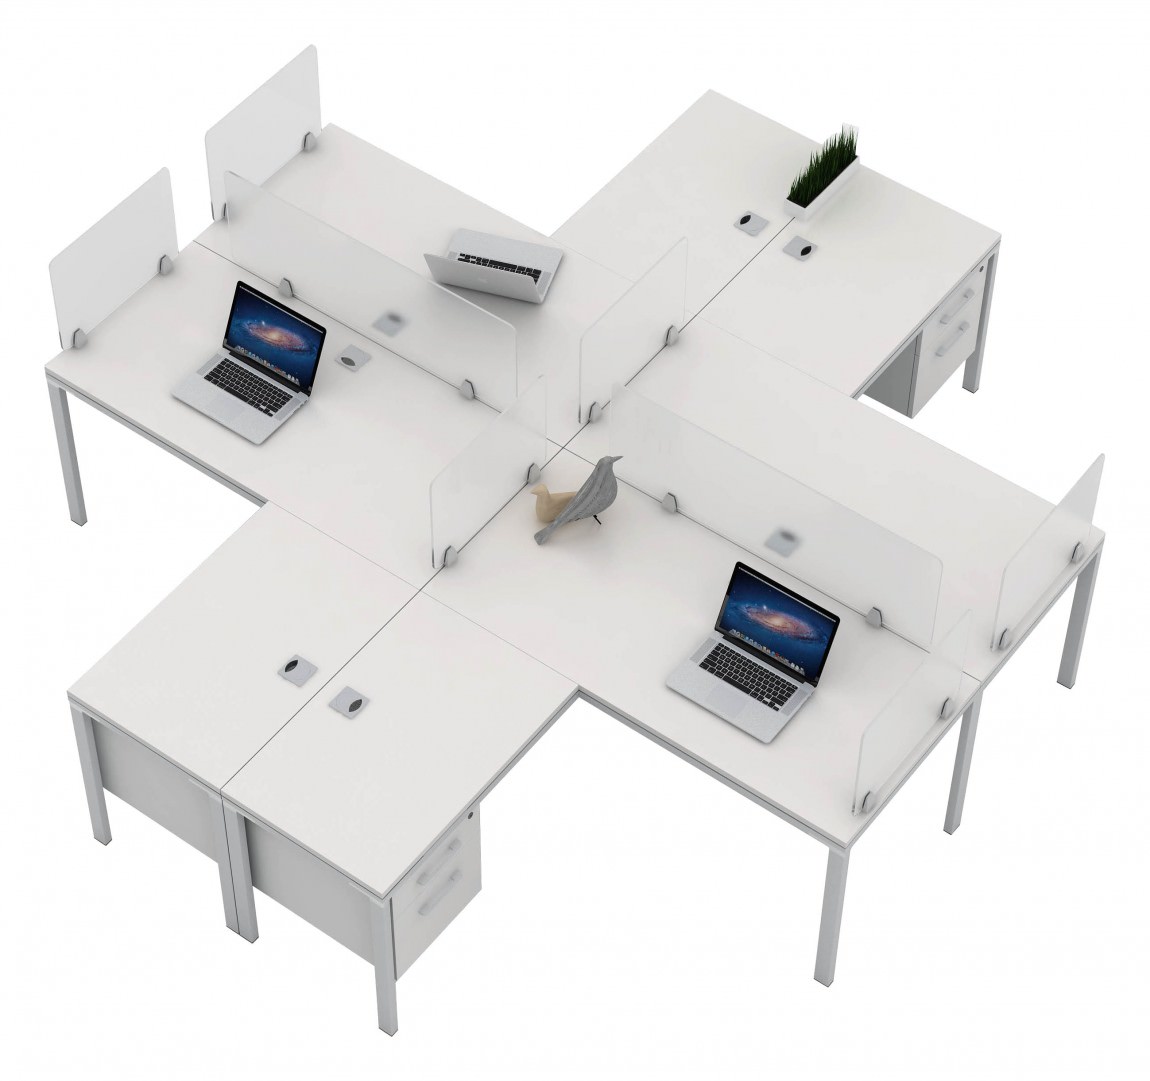 4 Person Workstation with Drawers